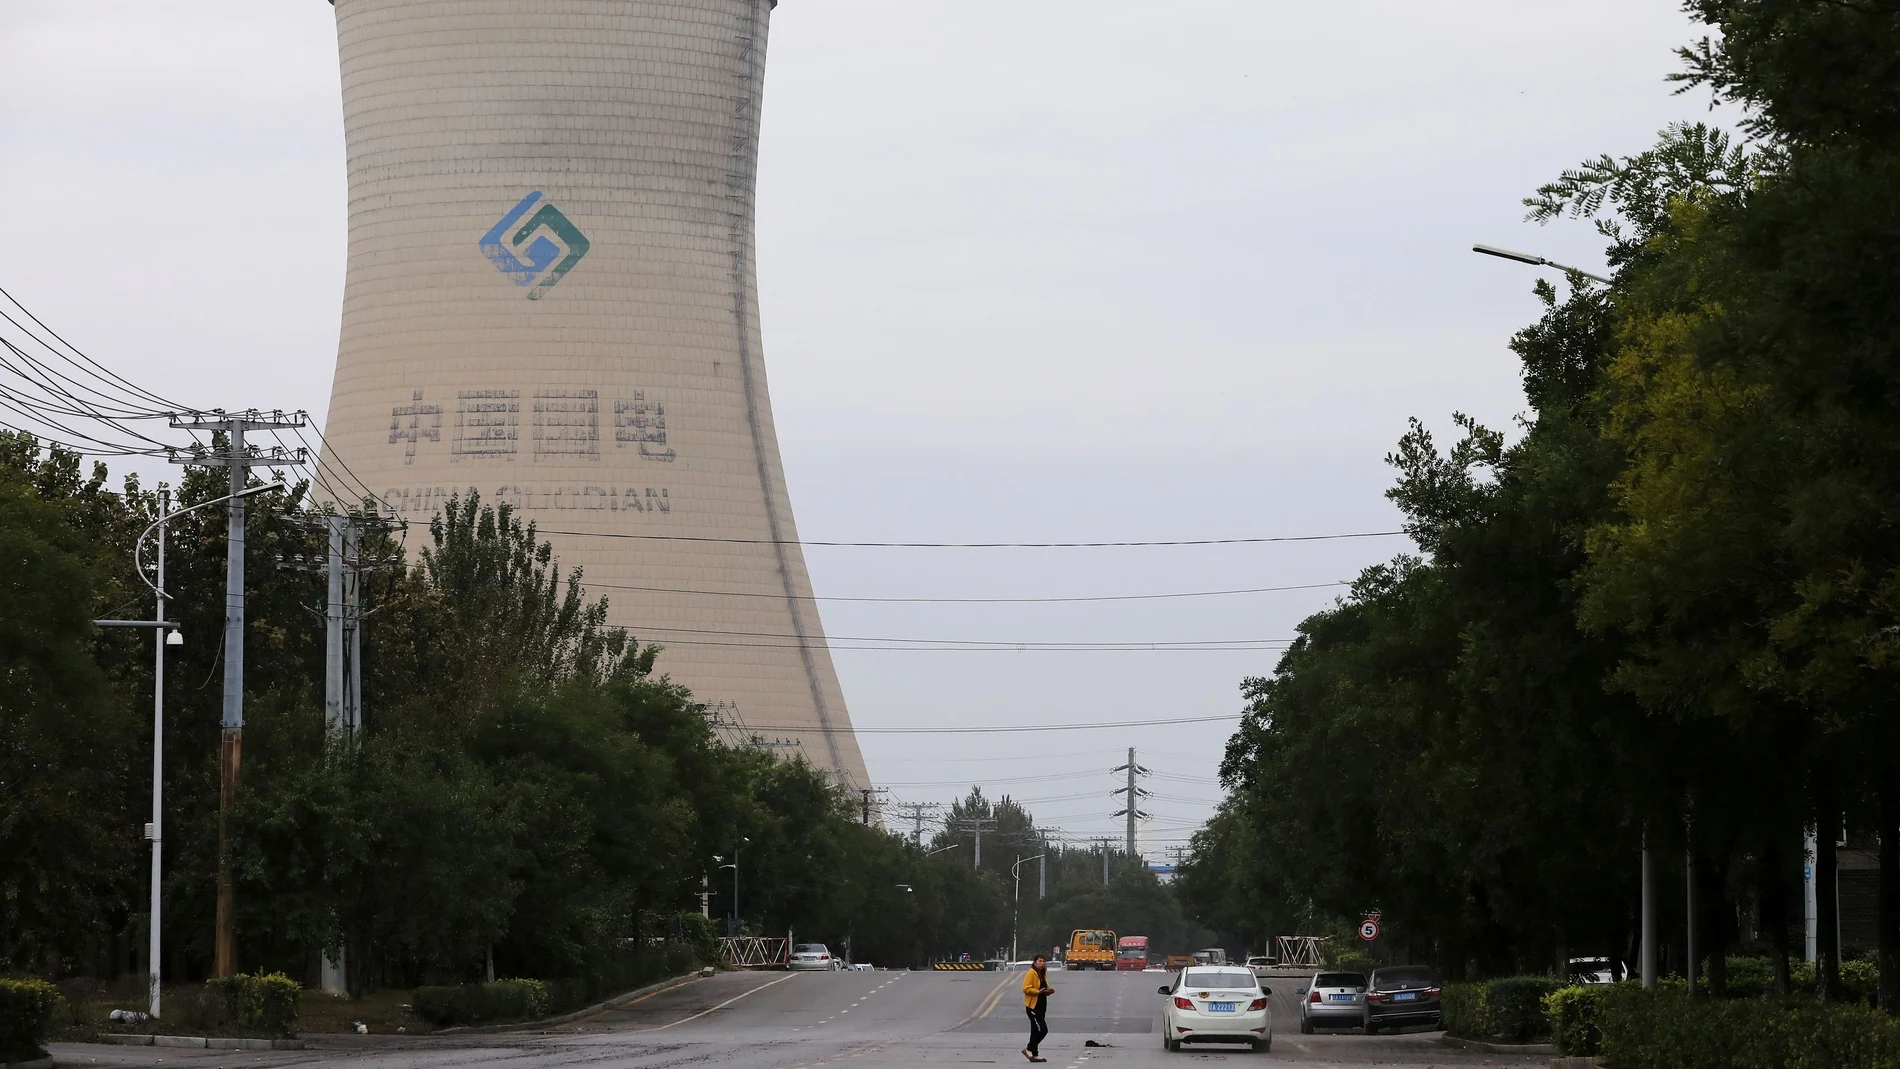 FILE PHOTO: A person walks near a China Energy coal-fired power plant in Shenyang, Liaoning province, China September 29, 2021. REUTERS/Tingshu Wang/File Photo